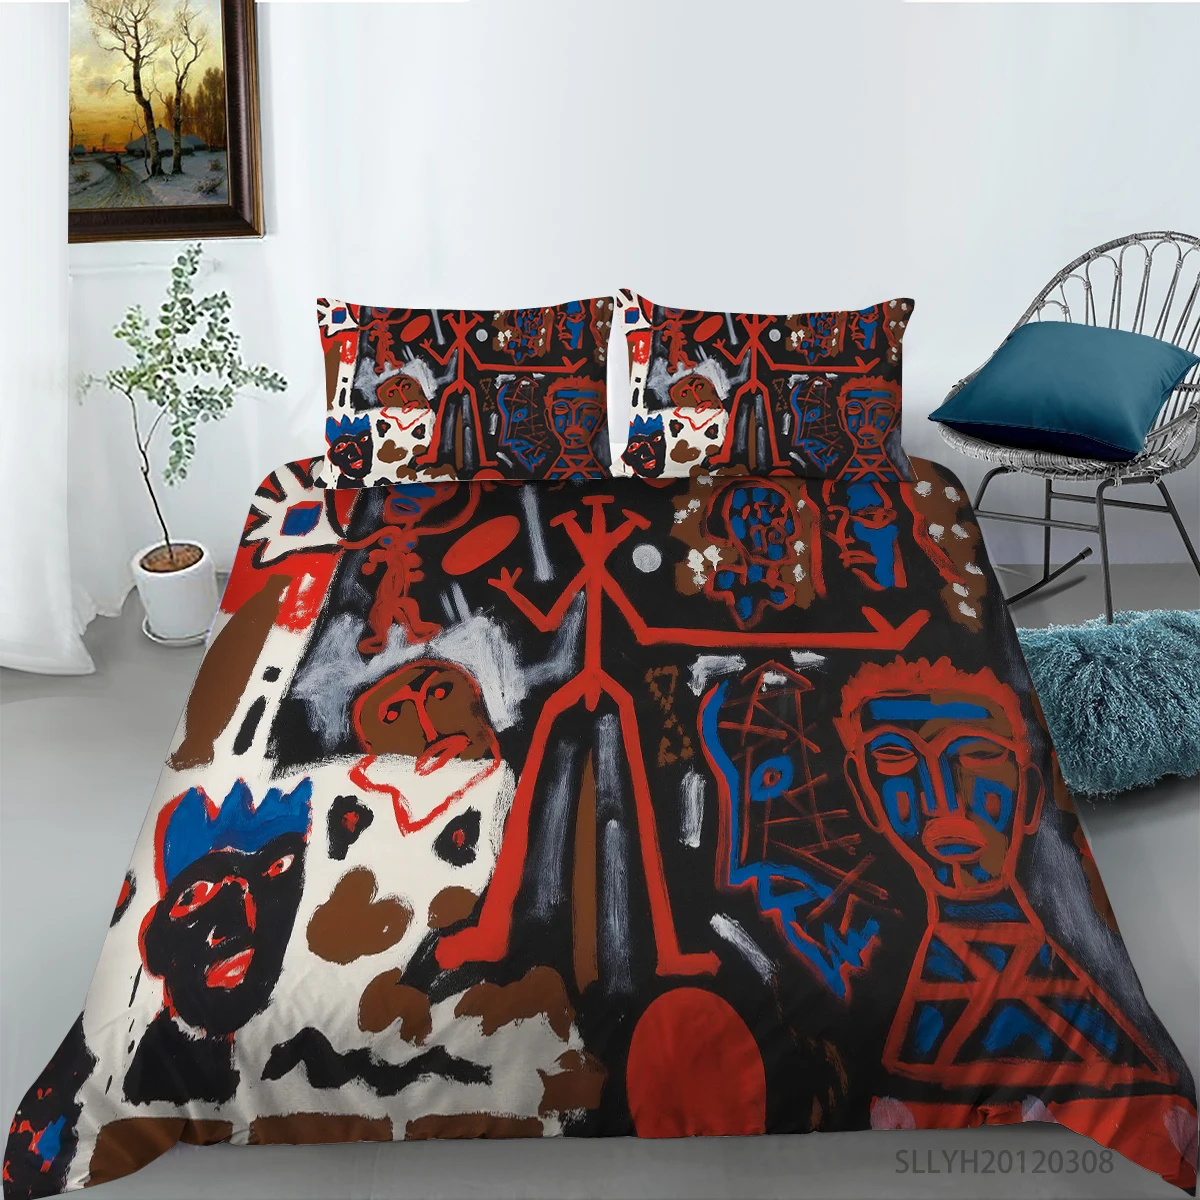 

Hot Sale Abstract Art Oil Painting Printing Bedding Set King Queen Sizes Duvet Cover with Pillowcases Home Textiles